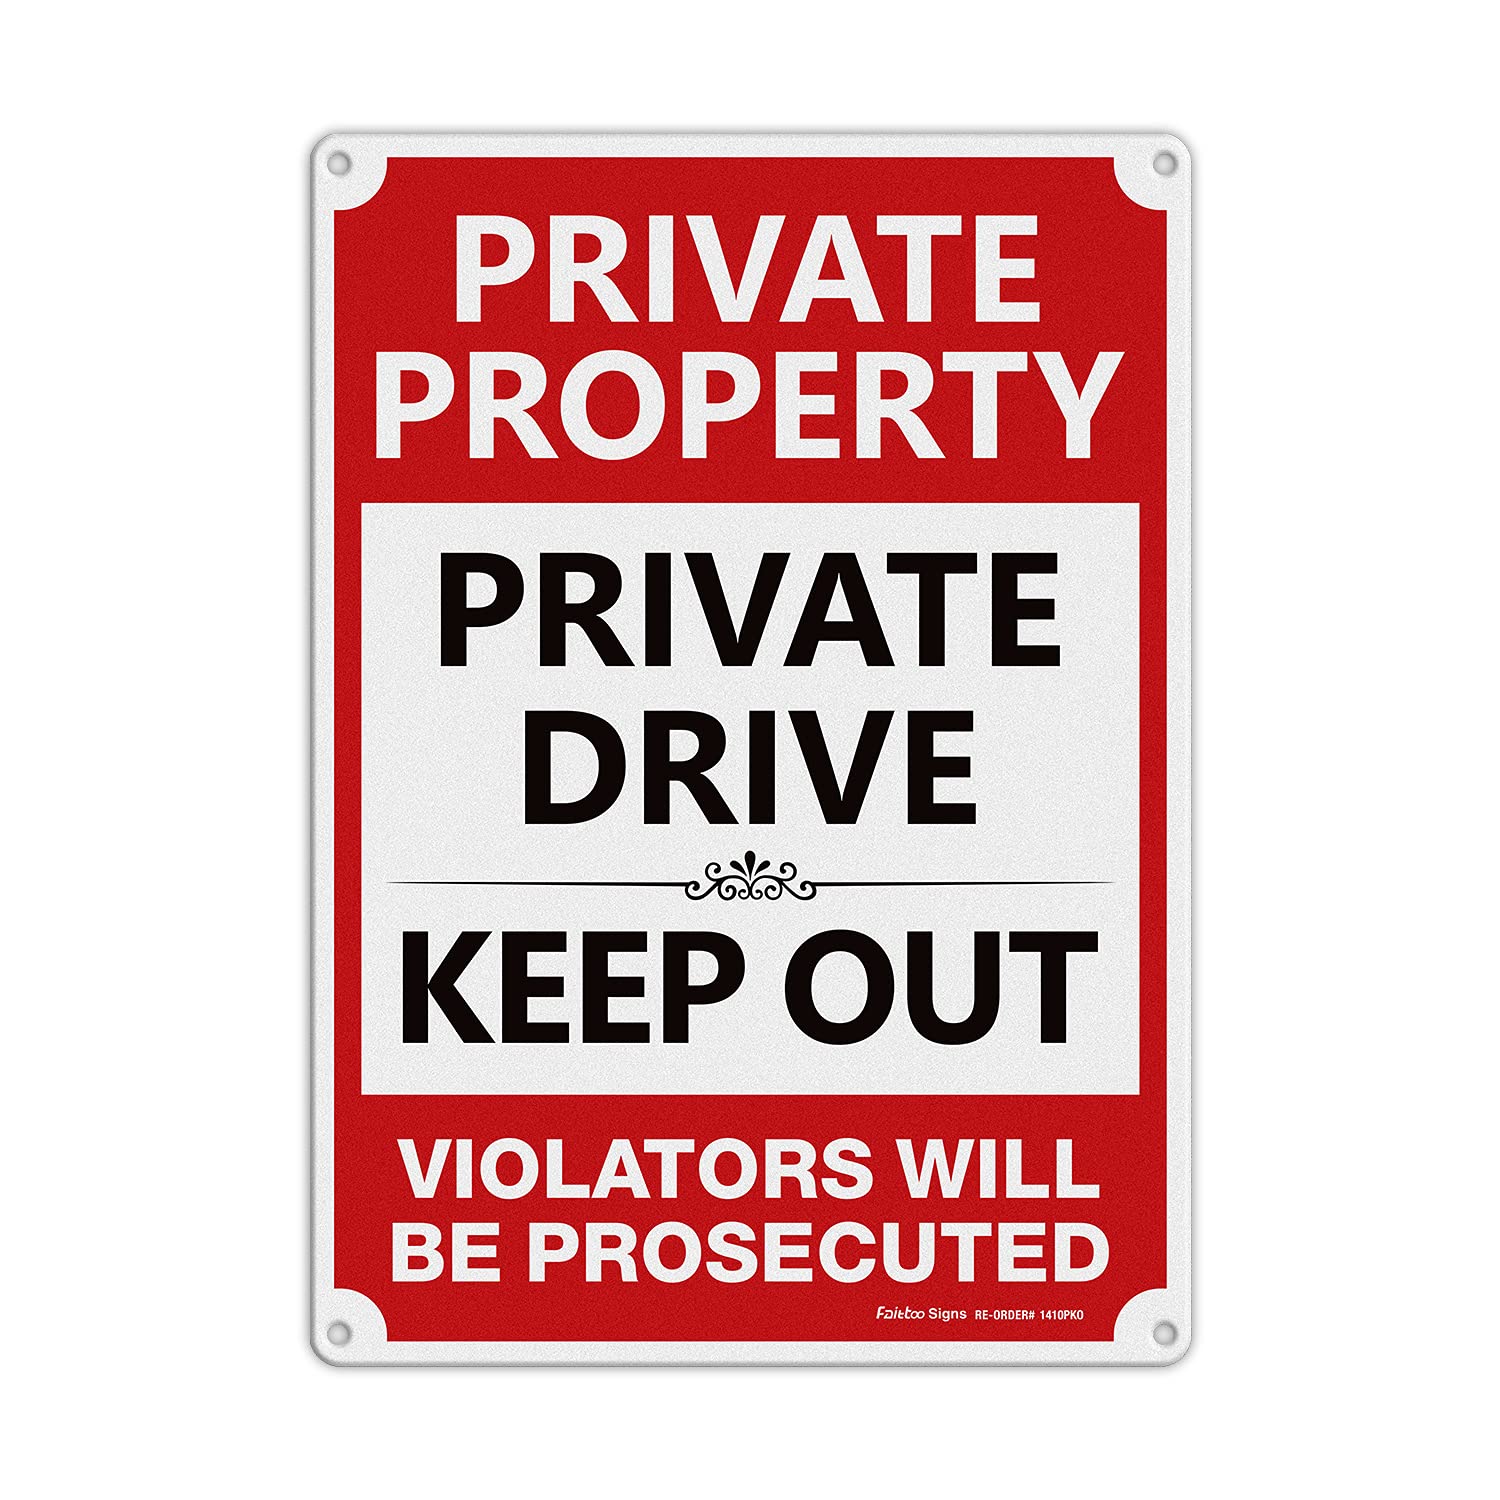 Private Property - Private Drive Keep Out, Violators Will Be Prosecuted Sign, Private Property Sign,14x10 In, Reflective,Rustfree Aluminum, Weather/Fade Resistant, Easy Mounting, Indoor/Outdoor Use